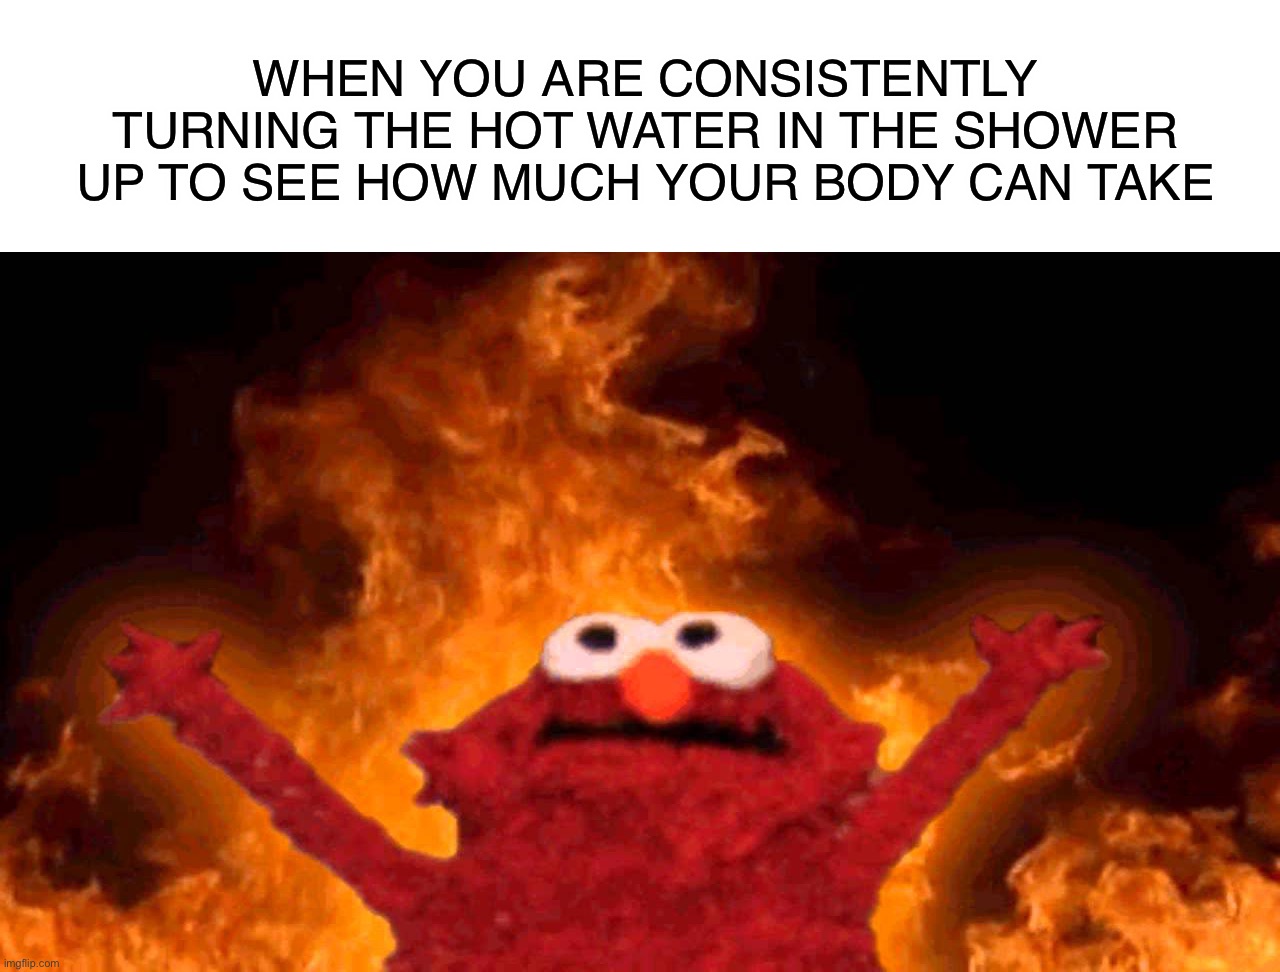 Hot Shower Water | WHEN YOU ARE CONSISTENTLY TURNING THE HOT WATER IN THE SHOWER UP TO SEE HOW MUCH YOUR BODY CAN TAKE | image tagged in elmo fire,memes,funny,shower,hot water,lmao | made w/ Imgflip meme maker